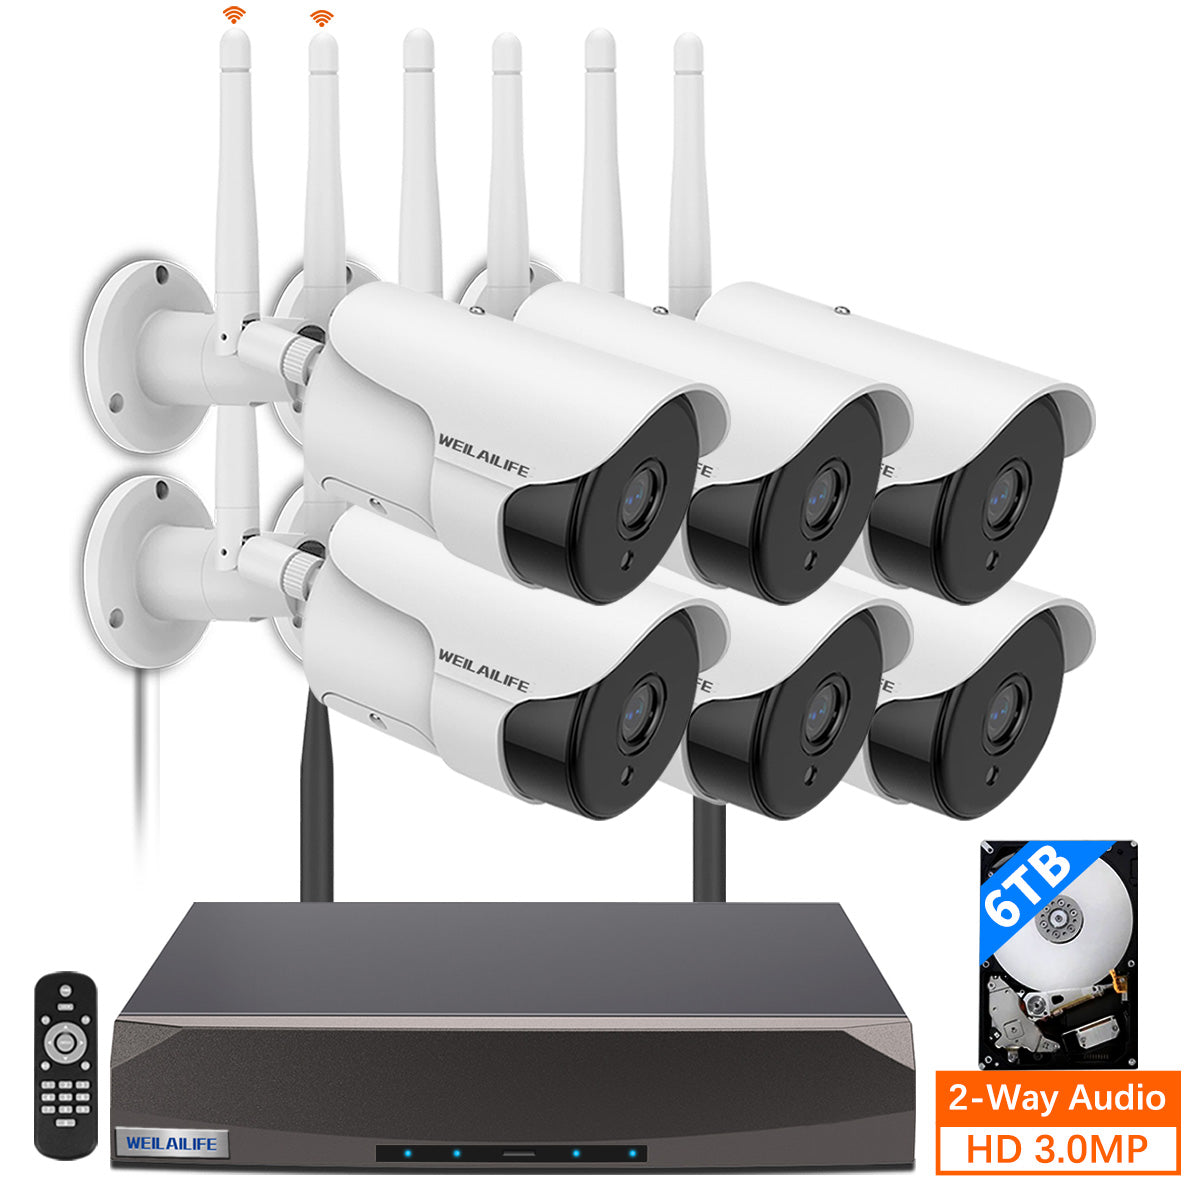 3.0MP & Two-Way Audio} Wireless Security Camera System 4TB Hard